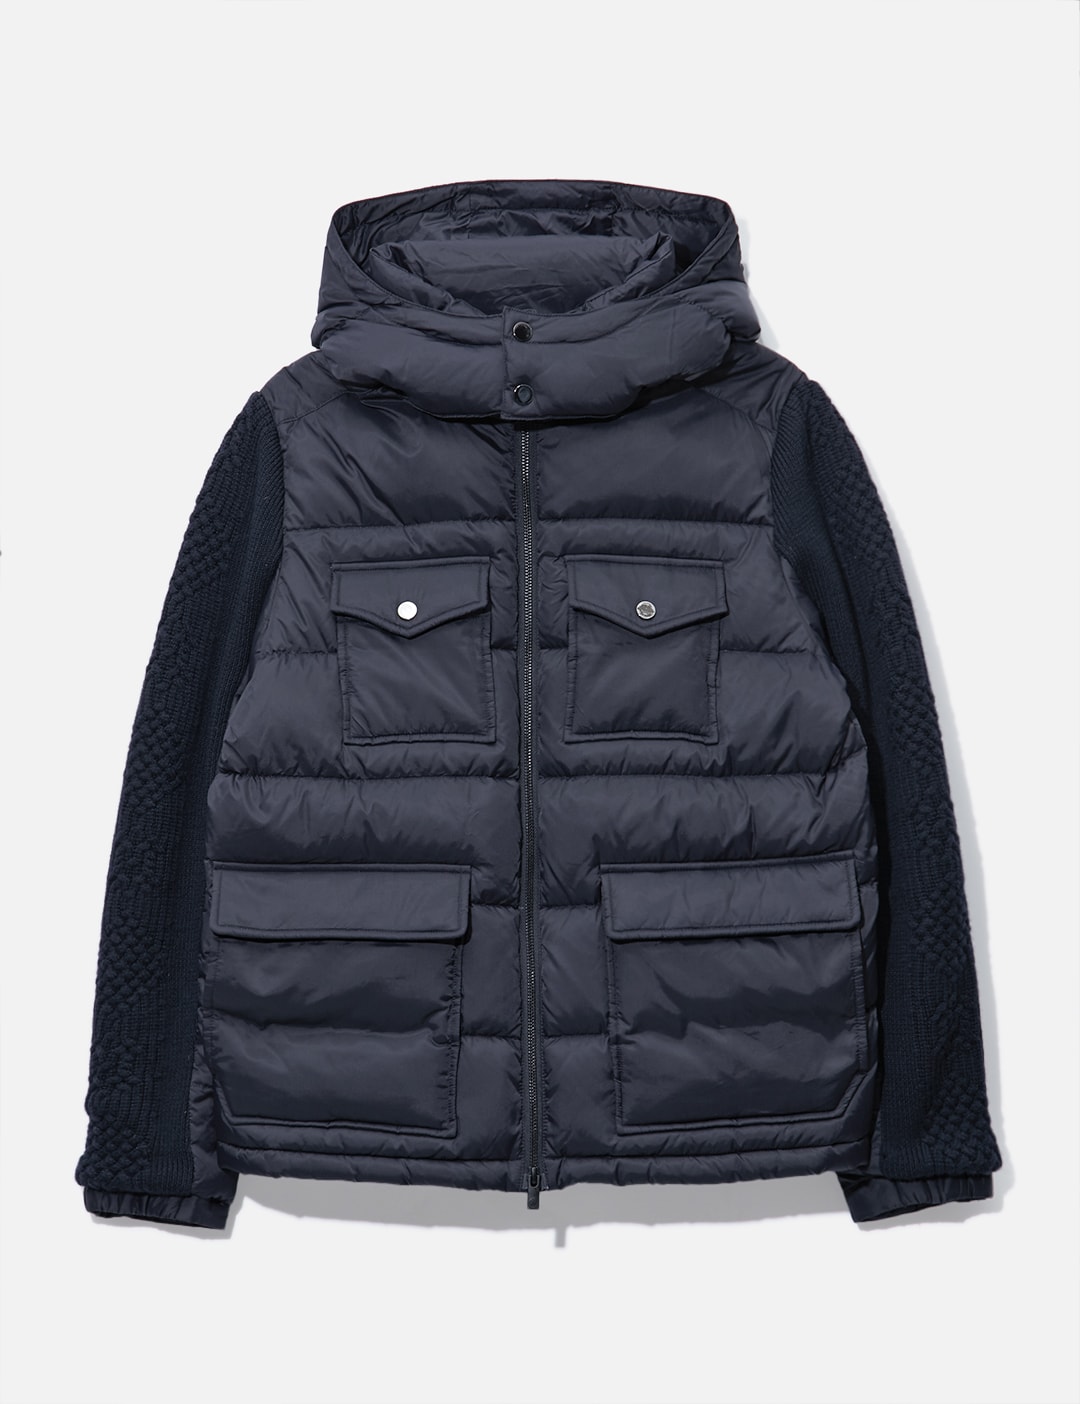 Shanghai Tang - Shanghai Tang Down Jacket with Knitted Sleeves | HBX ...